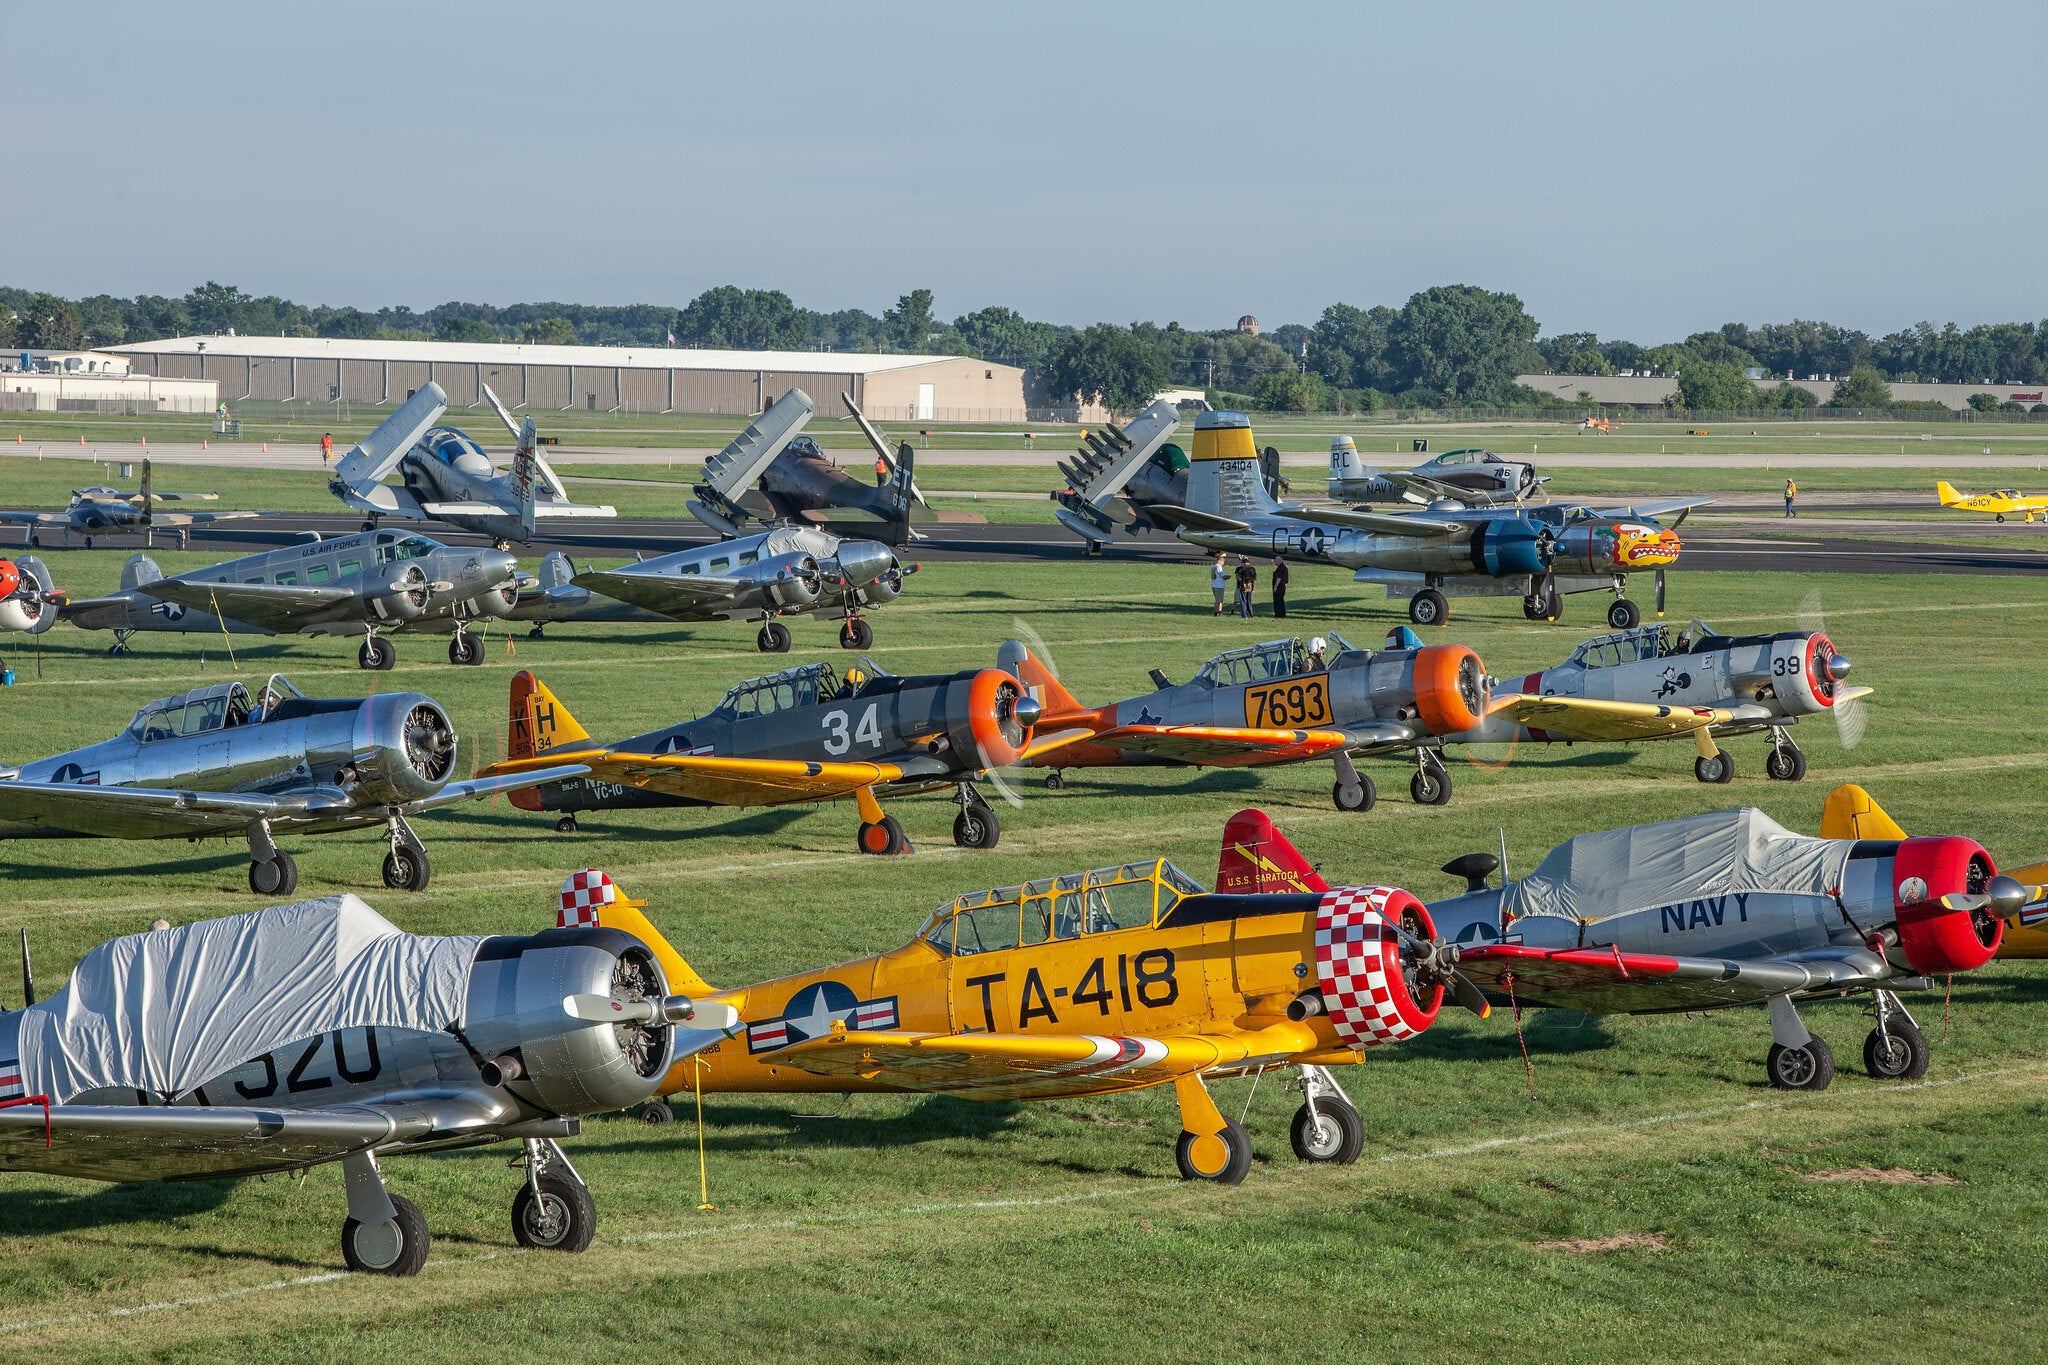 How to Navigate the Warbirds at AirVenture